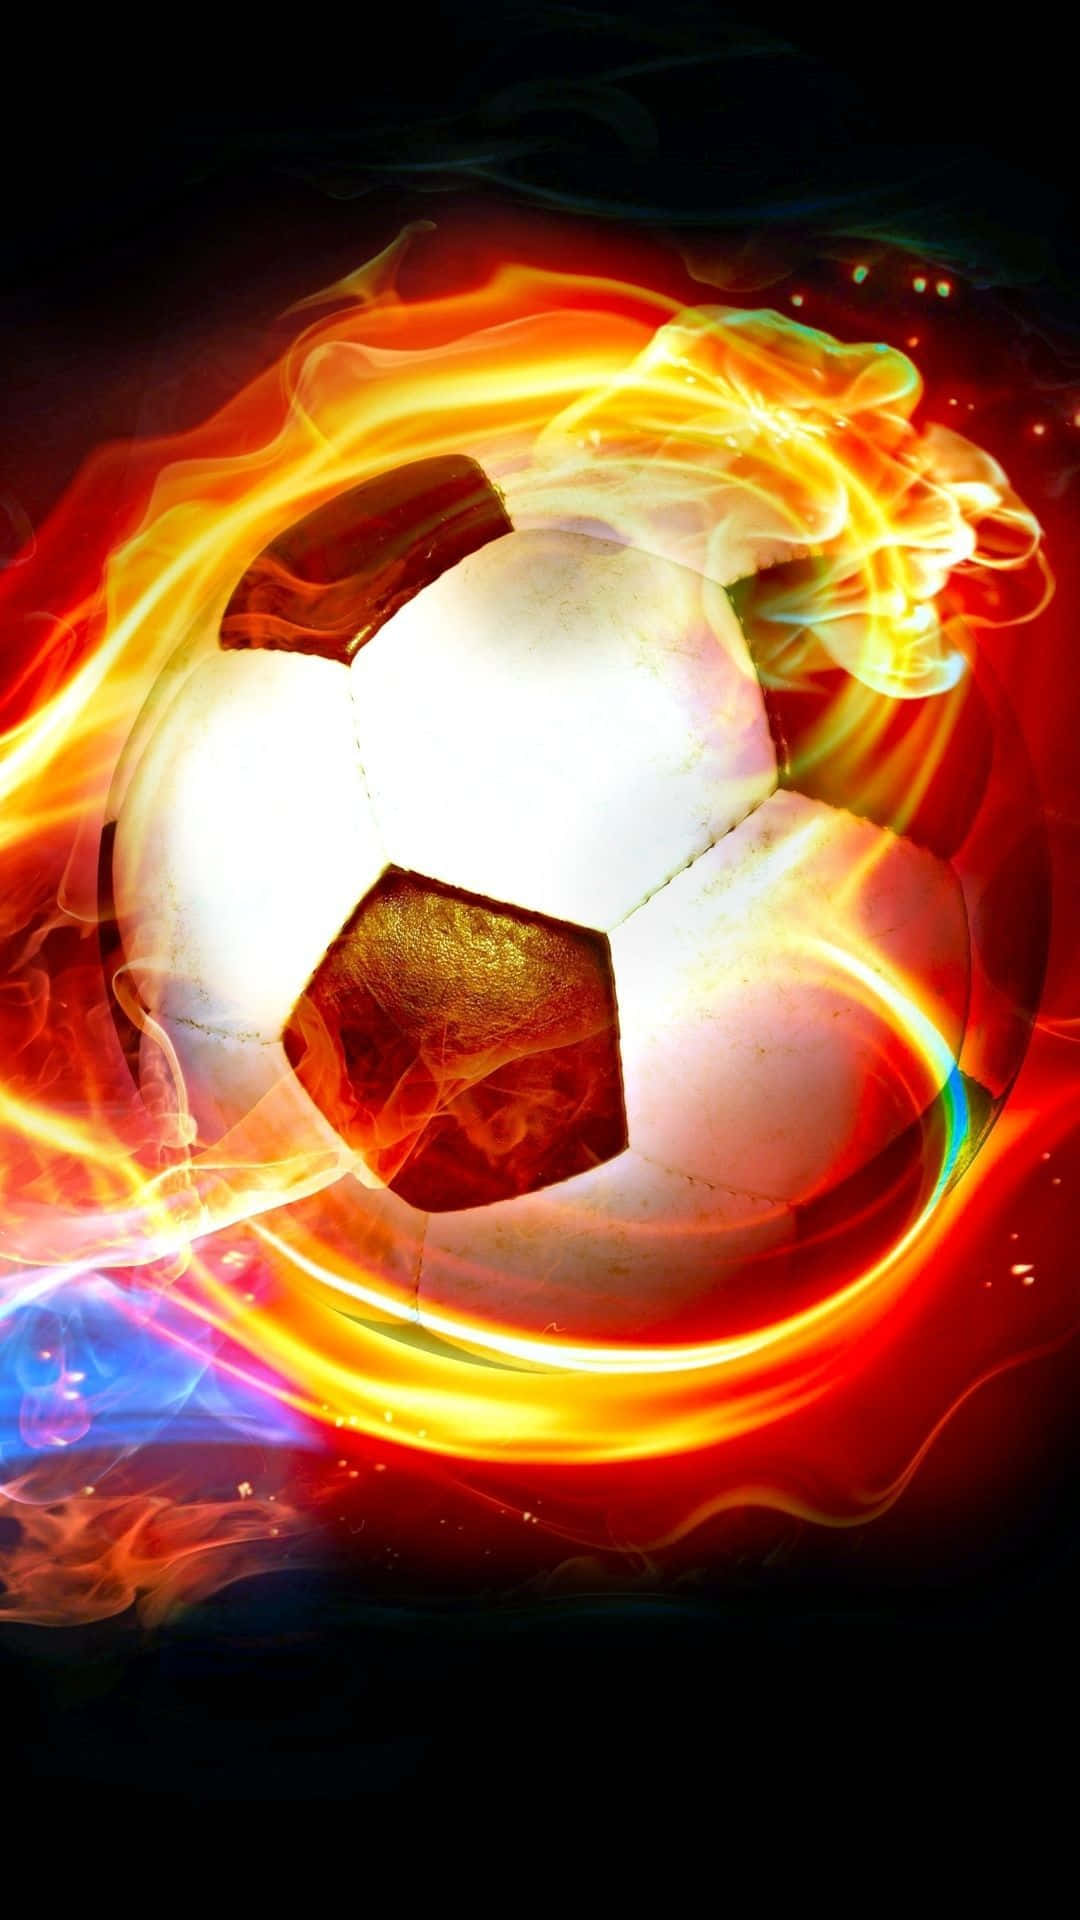 A Soccer Ball In Flames On A Black Background Wallpaper